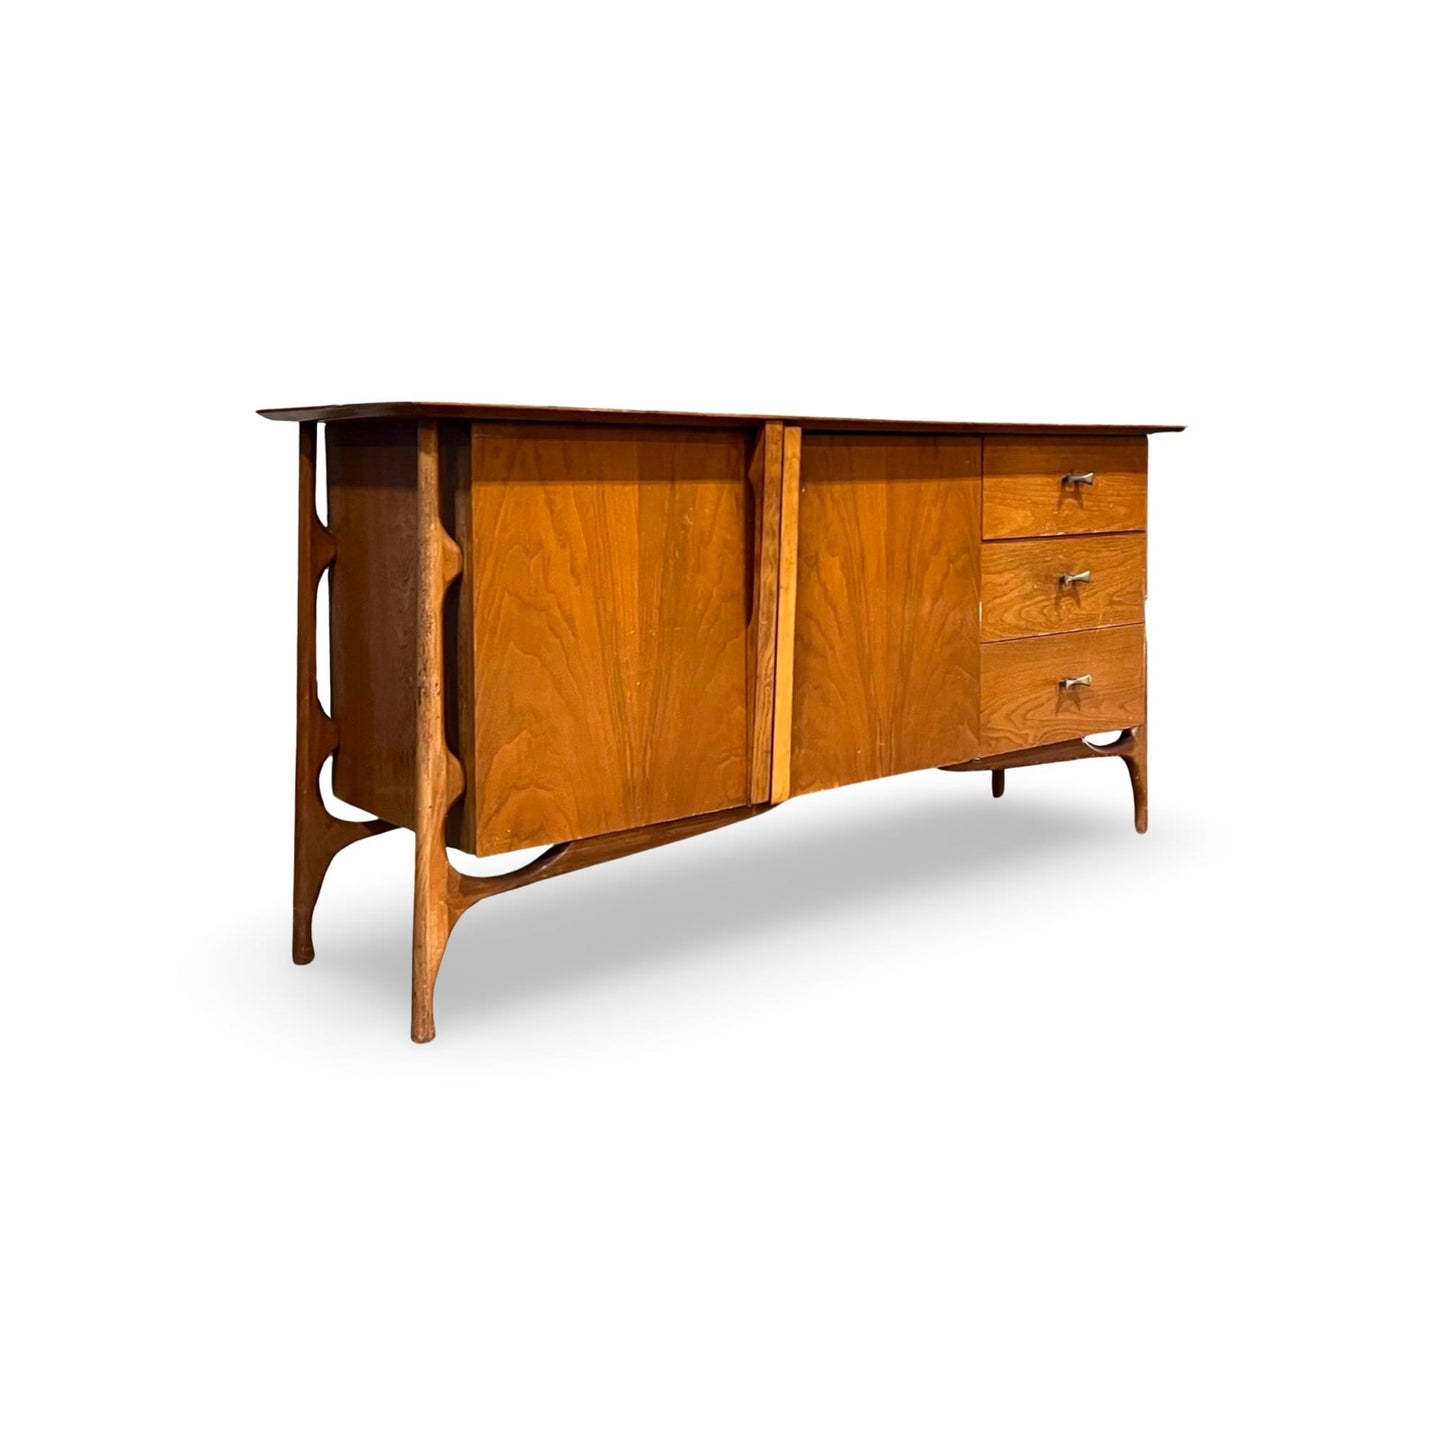 1960s Specialty Woodcrafts buffet inspired by William Hinn's iconic designs.